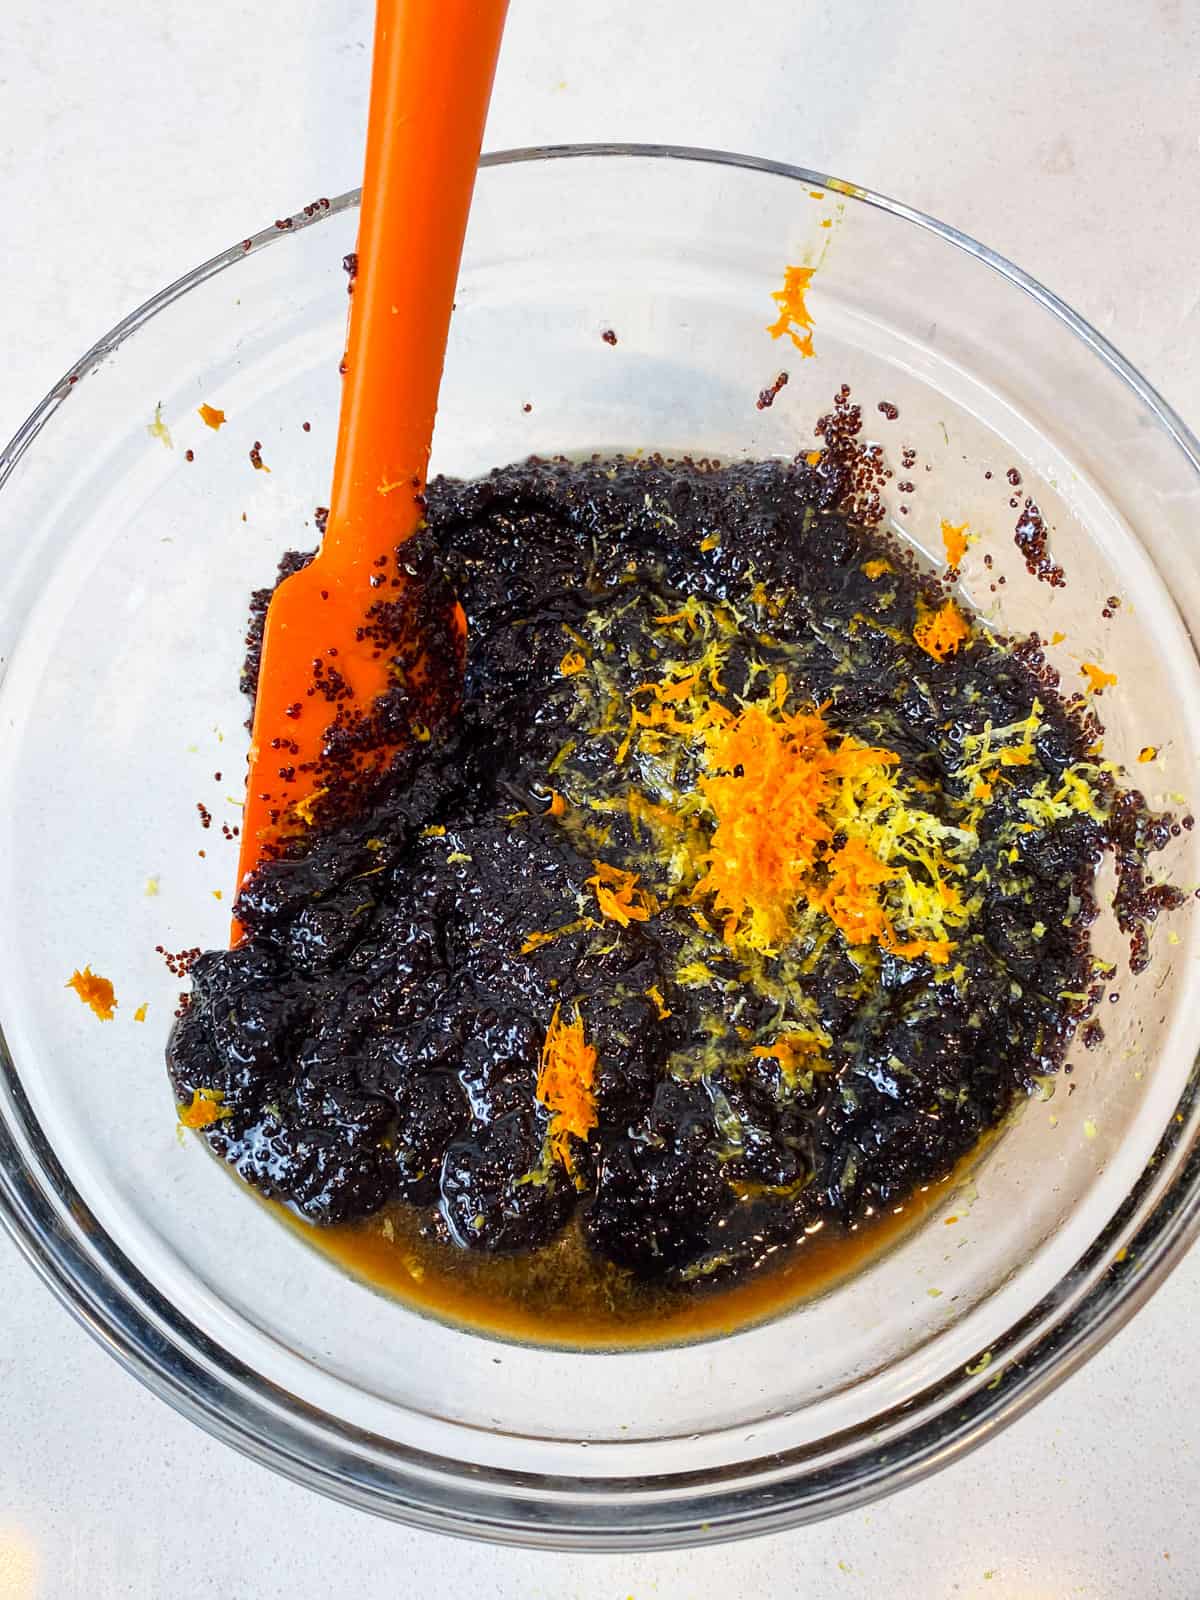 Add the vanilla extract and citrus zest to the sweetened poppyseed mixture.